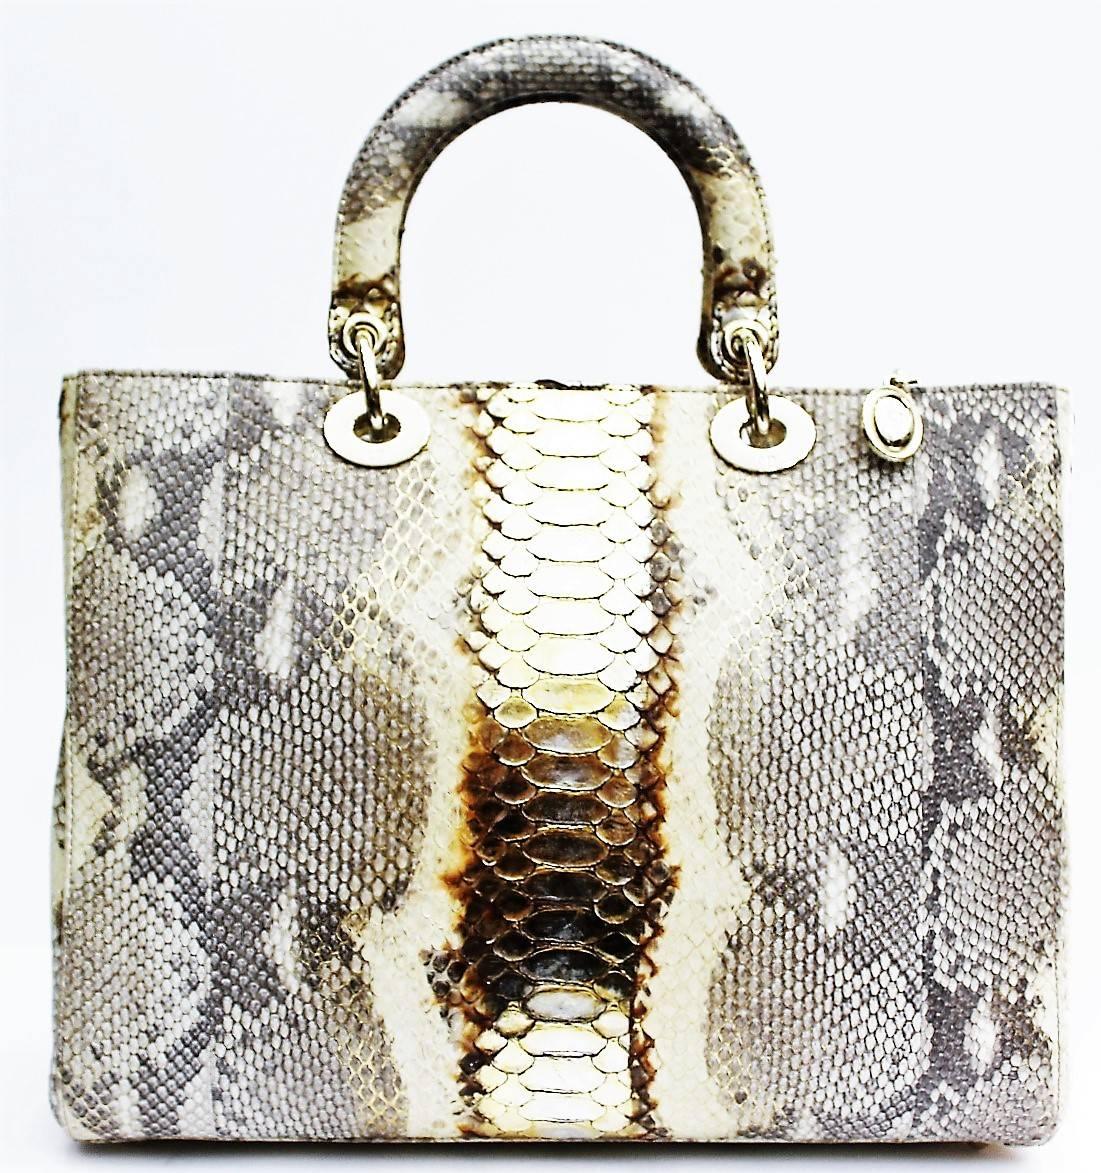 Breathtaking iconic handbag made famous by name and gave her a very princess Diana. This unique piece of luxury snakeskin leather is decorated with 18kt gold! Lady Dior is incredibly feminine elegant handbag, which is suitable for real lady - is